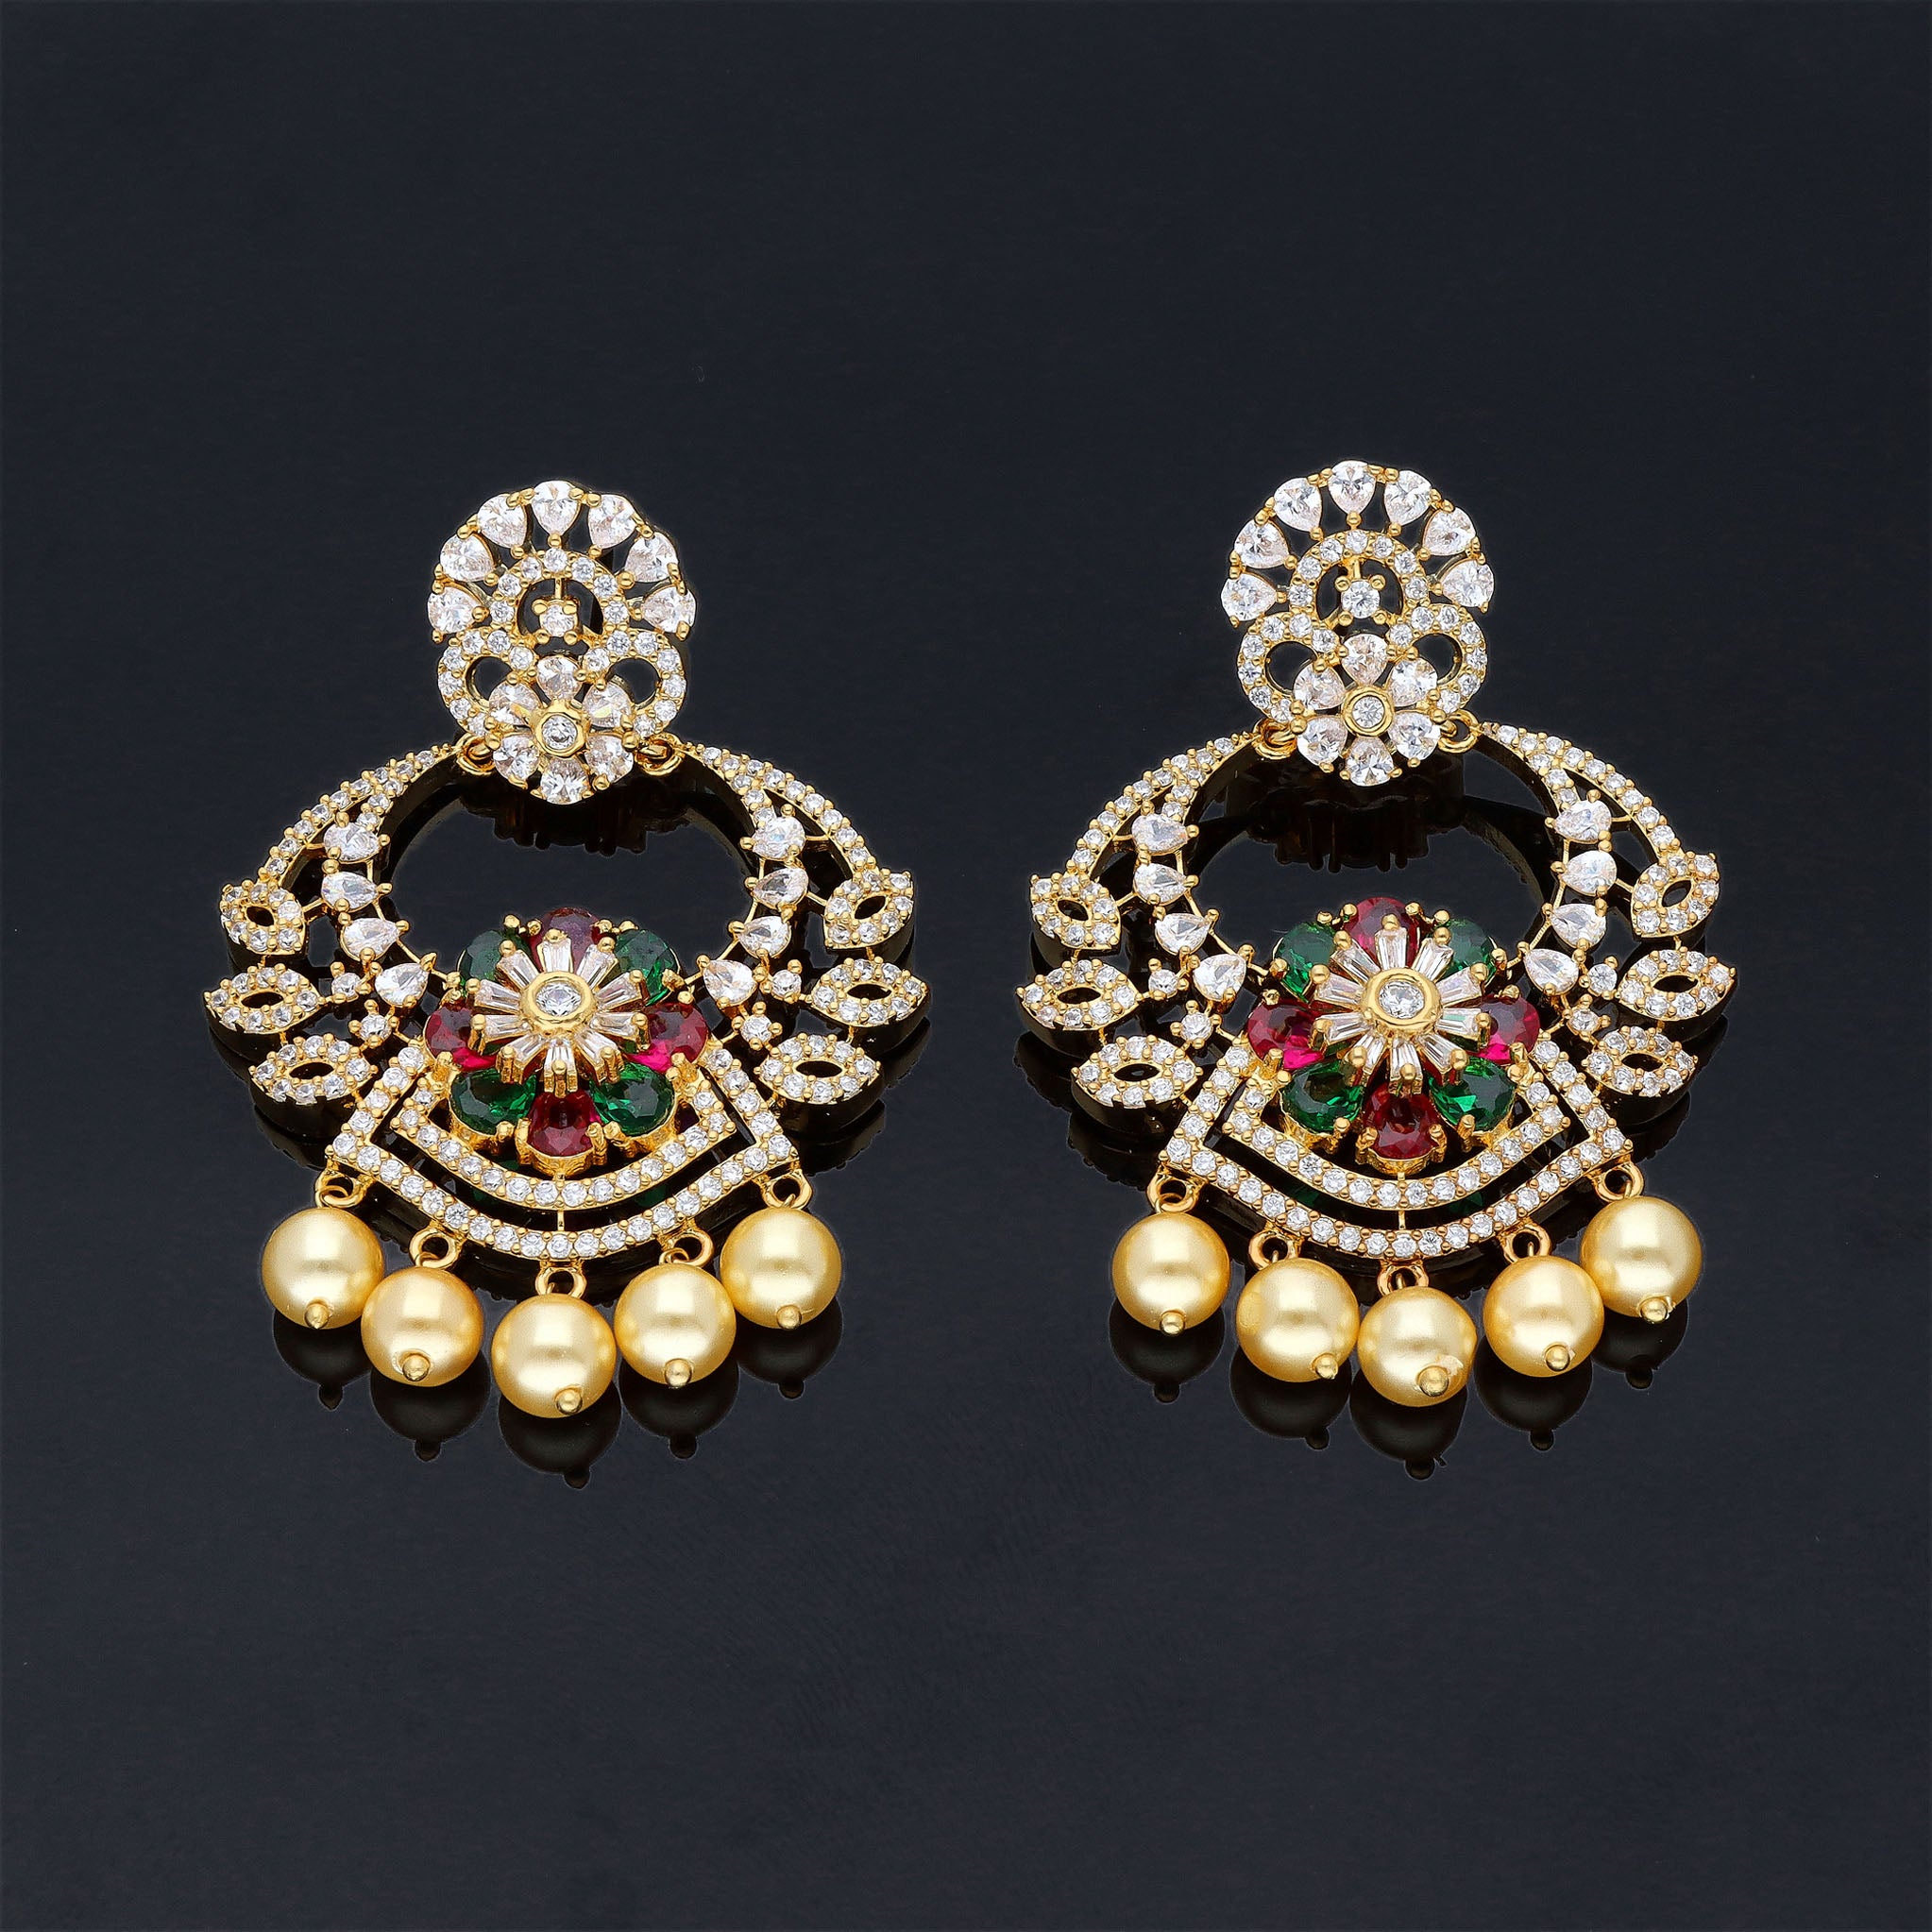 Traditional Gold and Diamond Polki Chand Bali Earring Pair with rubies  G  K Ratnam